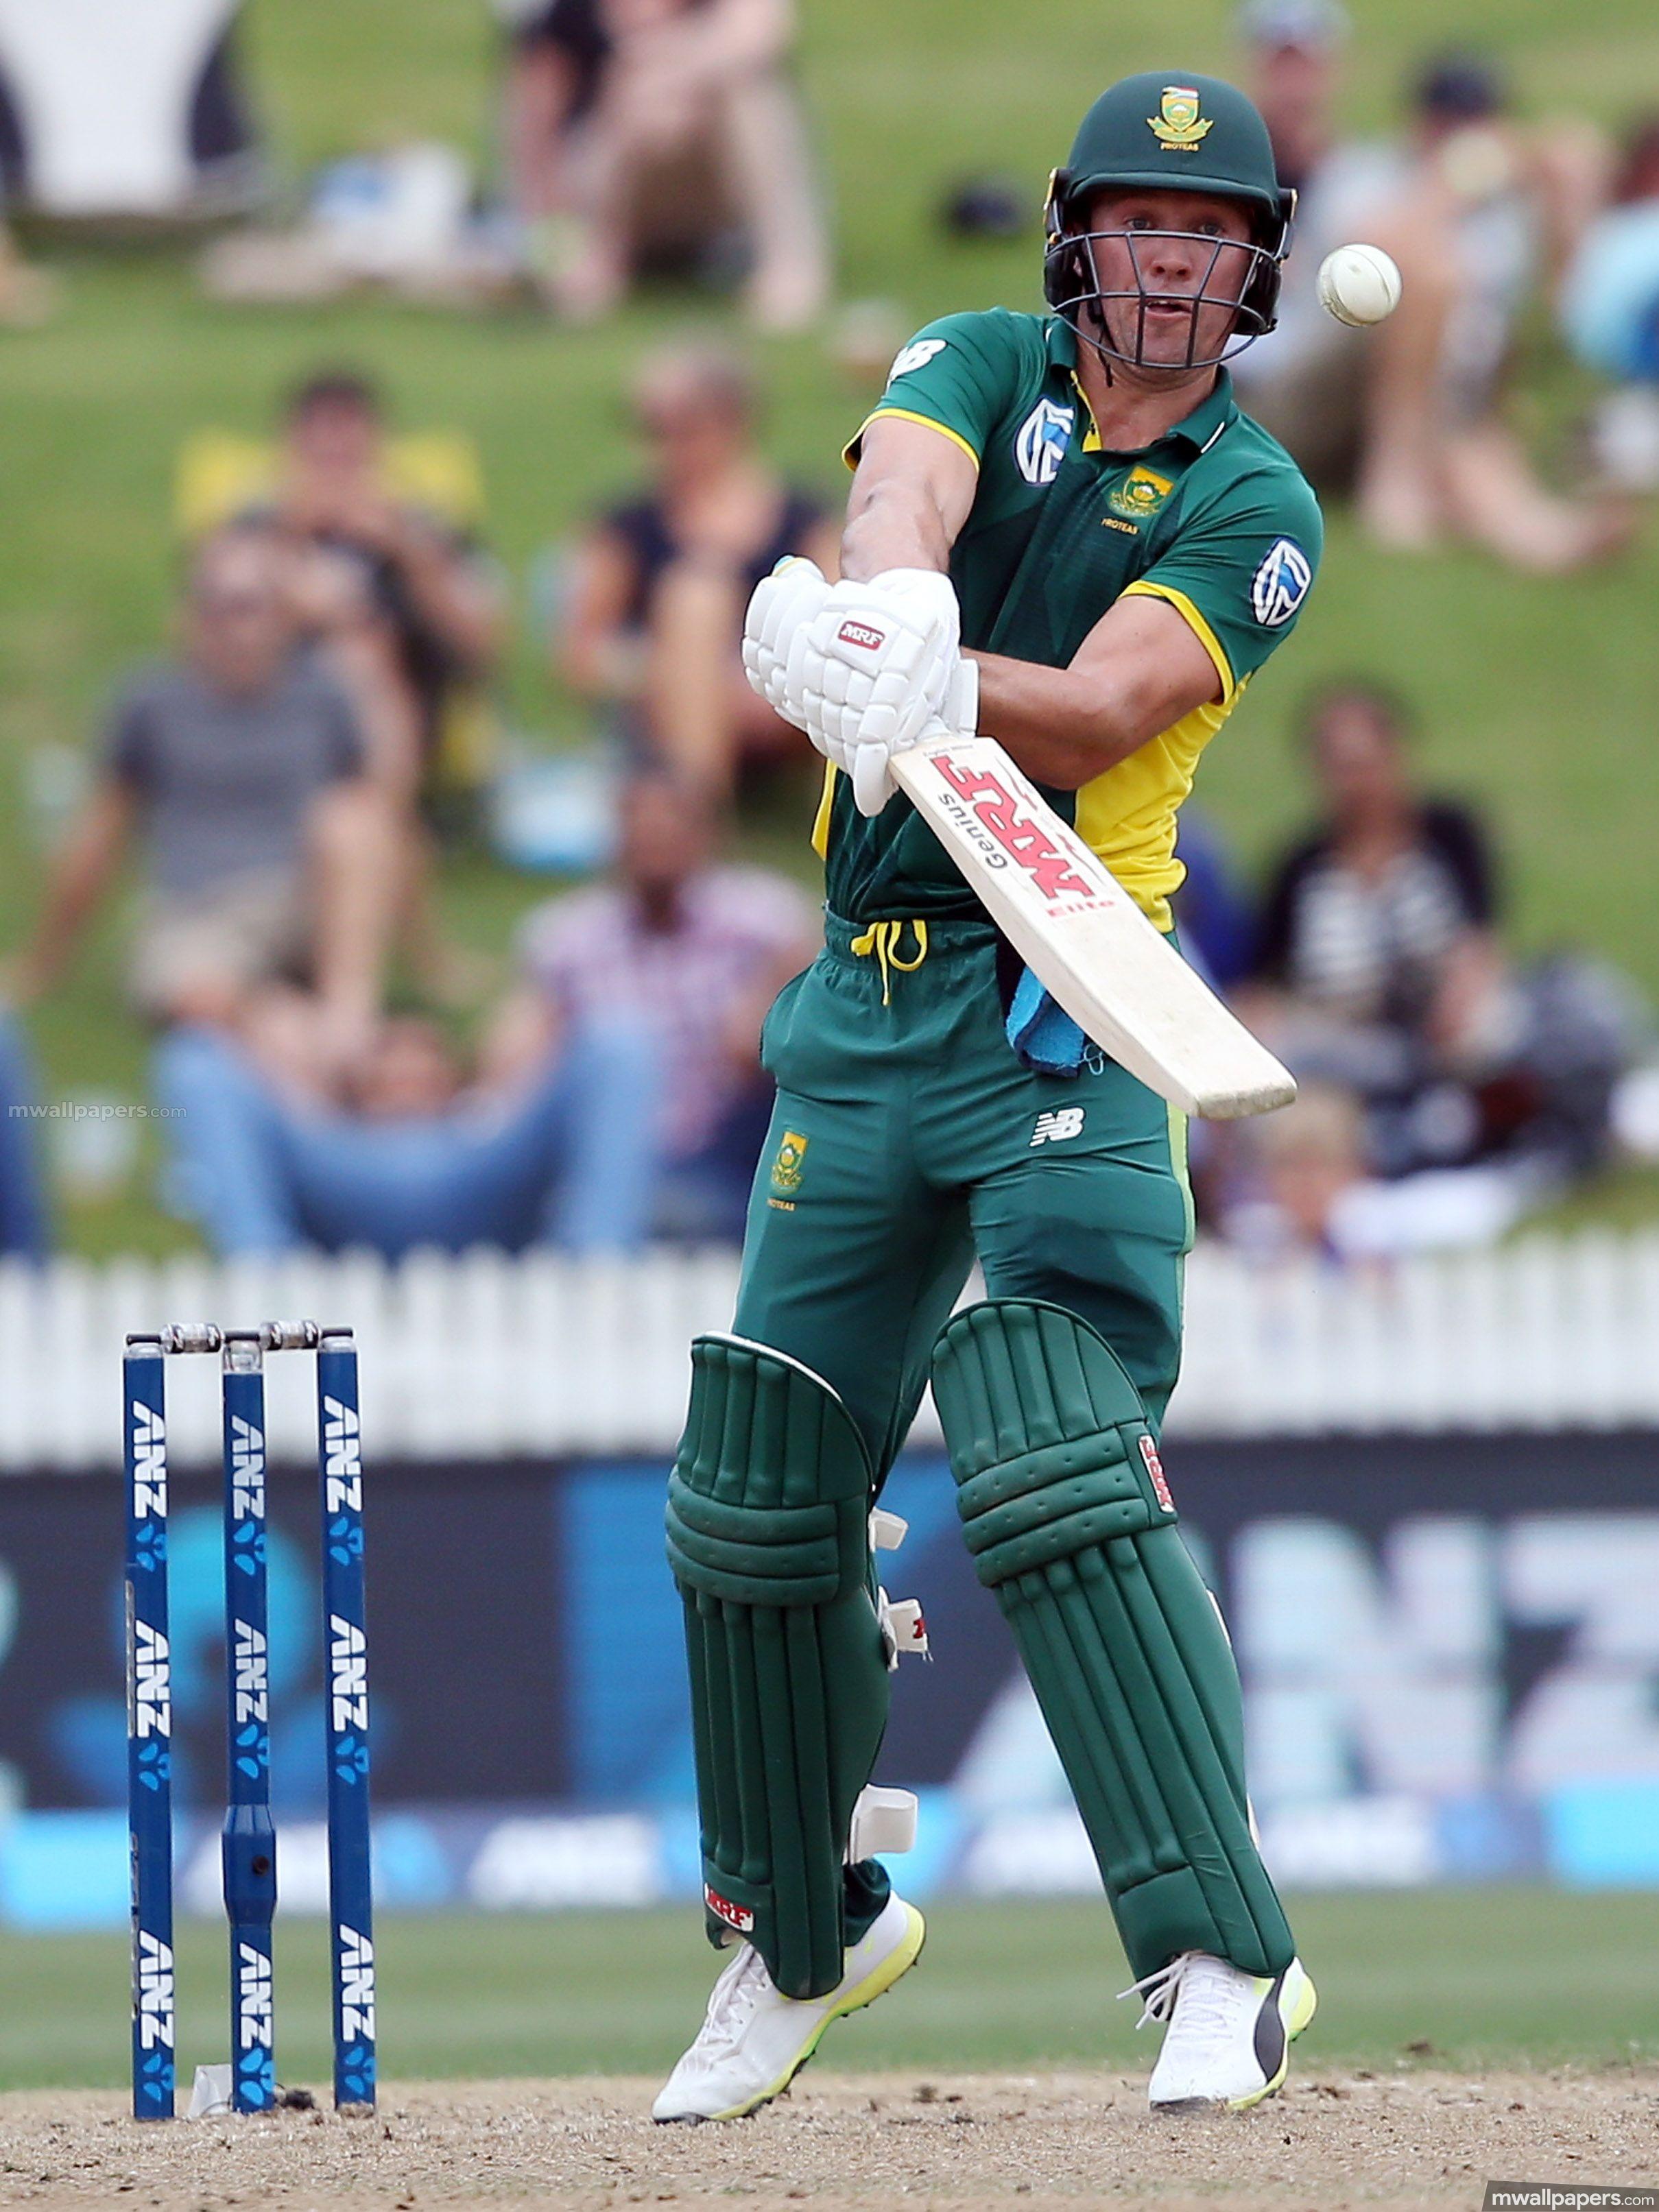 AB De Villiers HD Android Wallpapers - Wallpaper Cave